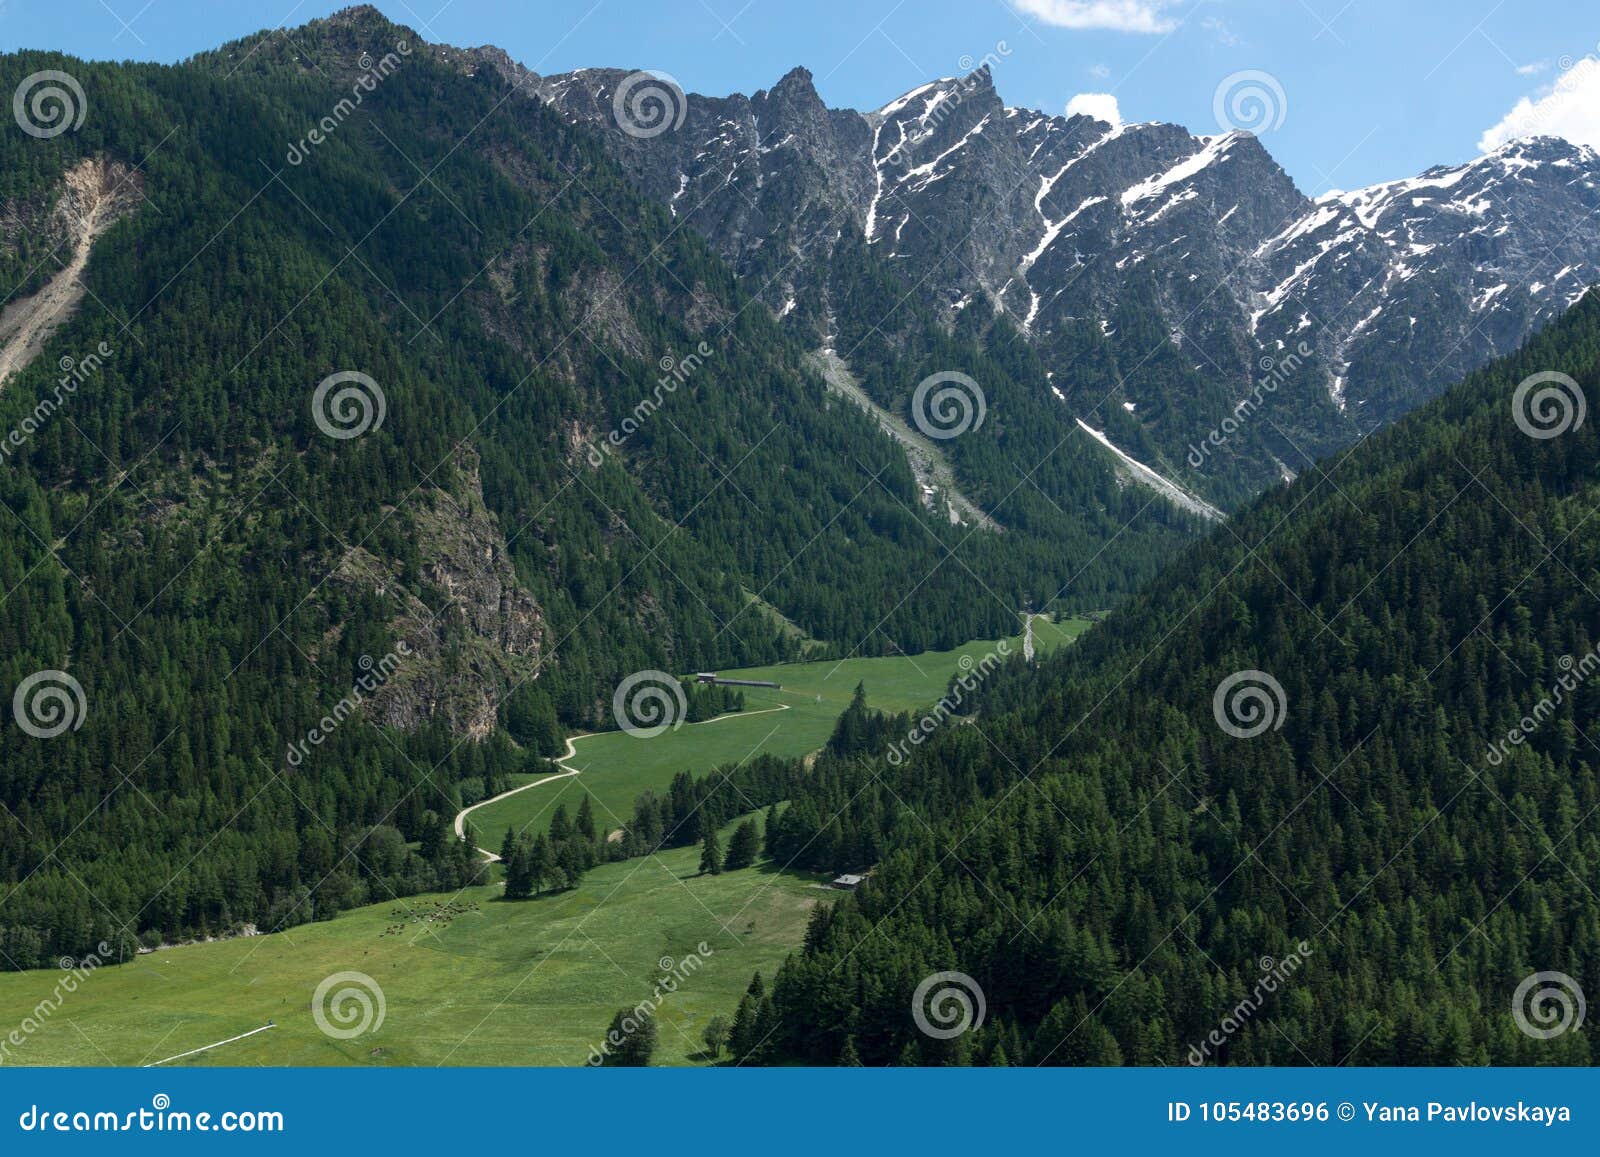 Beautiful Green Valley With Covered Snow Mountain Peaks Stock Photo